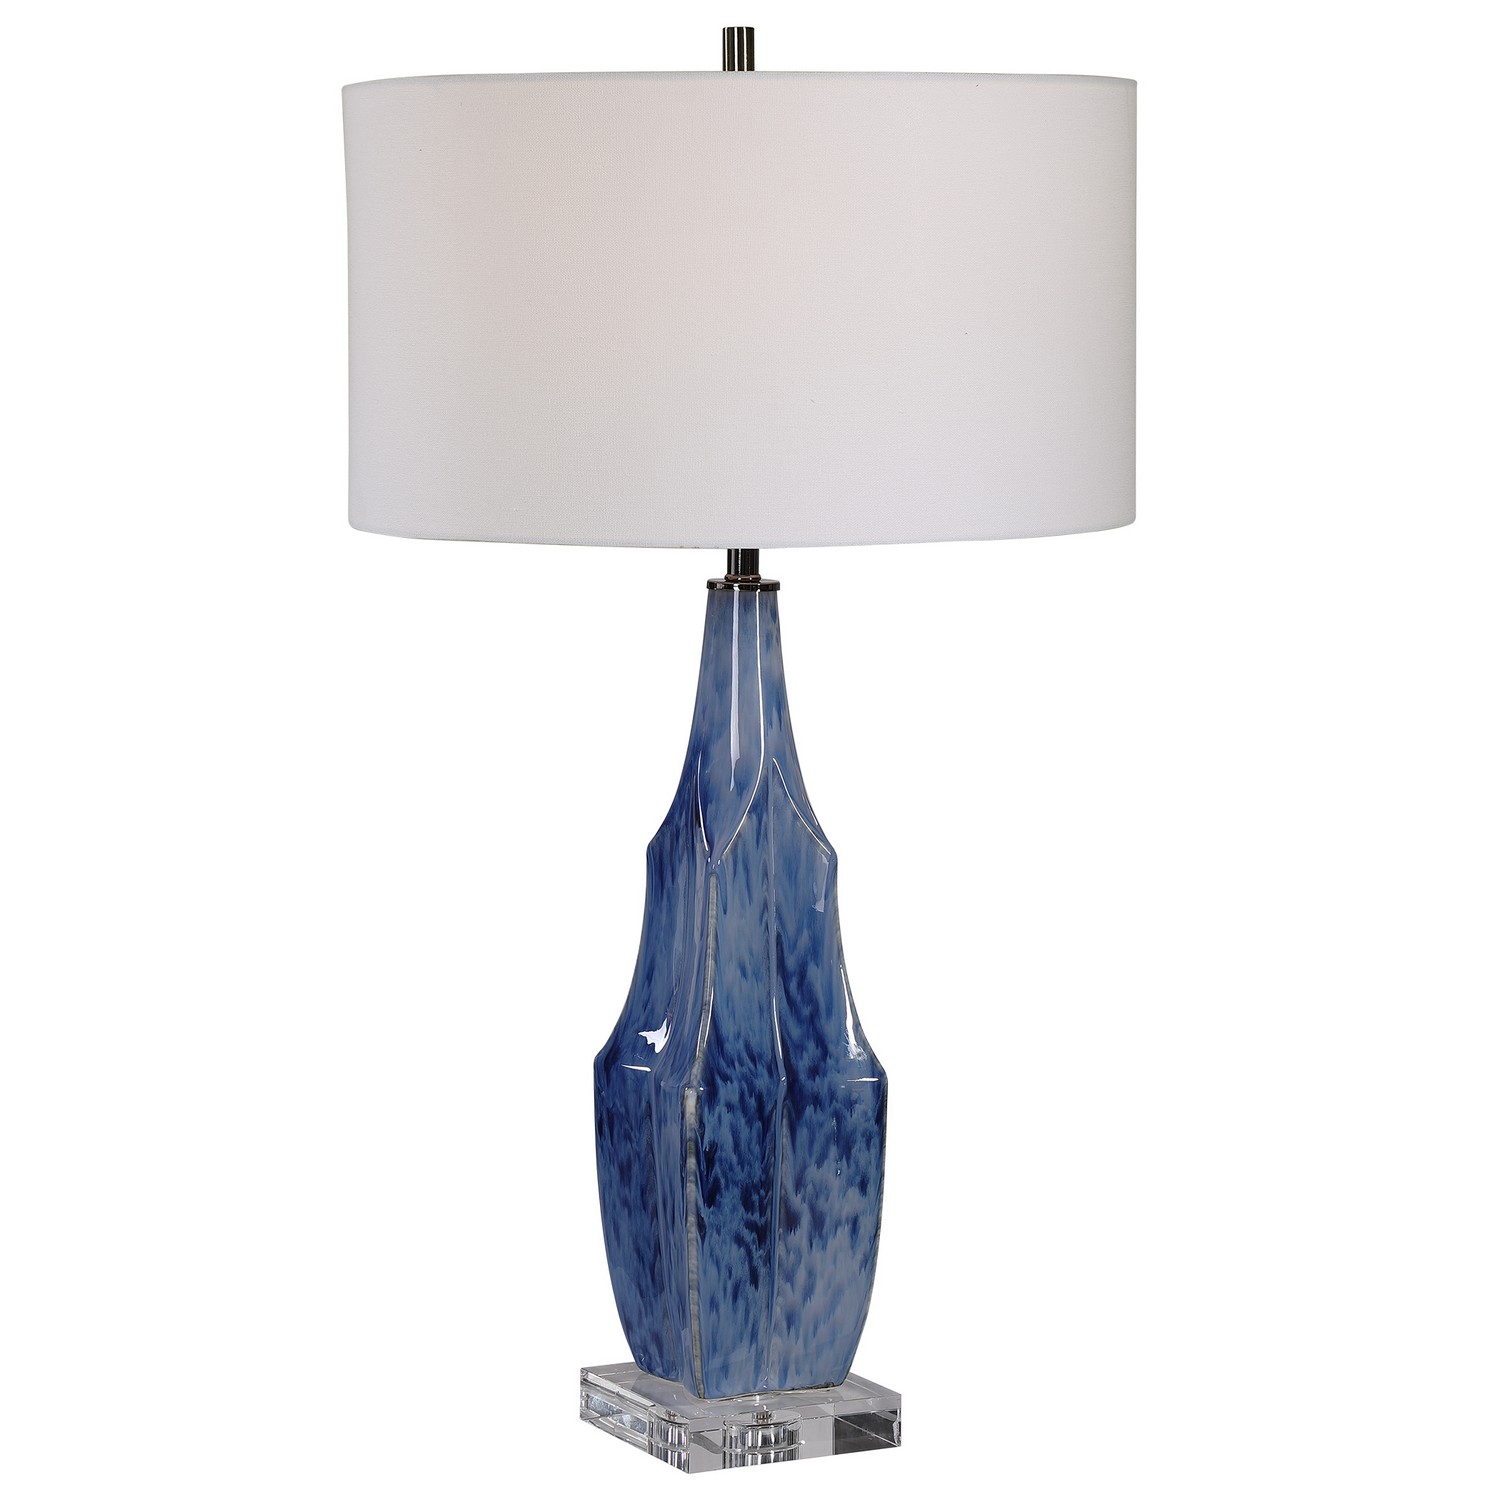 Uttermost Everard Table Lamp - Blue